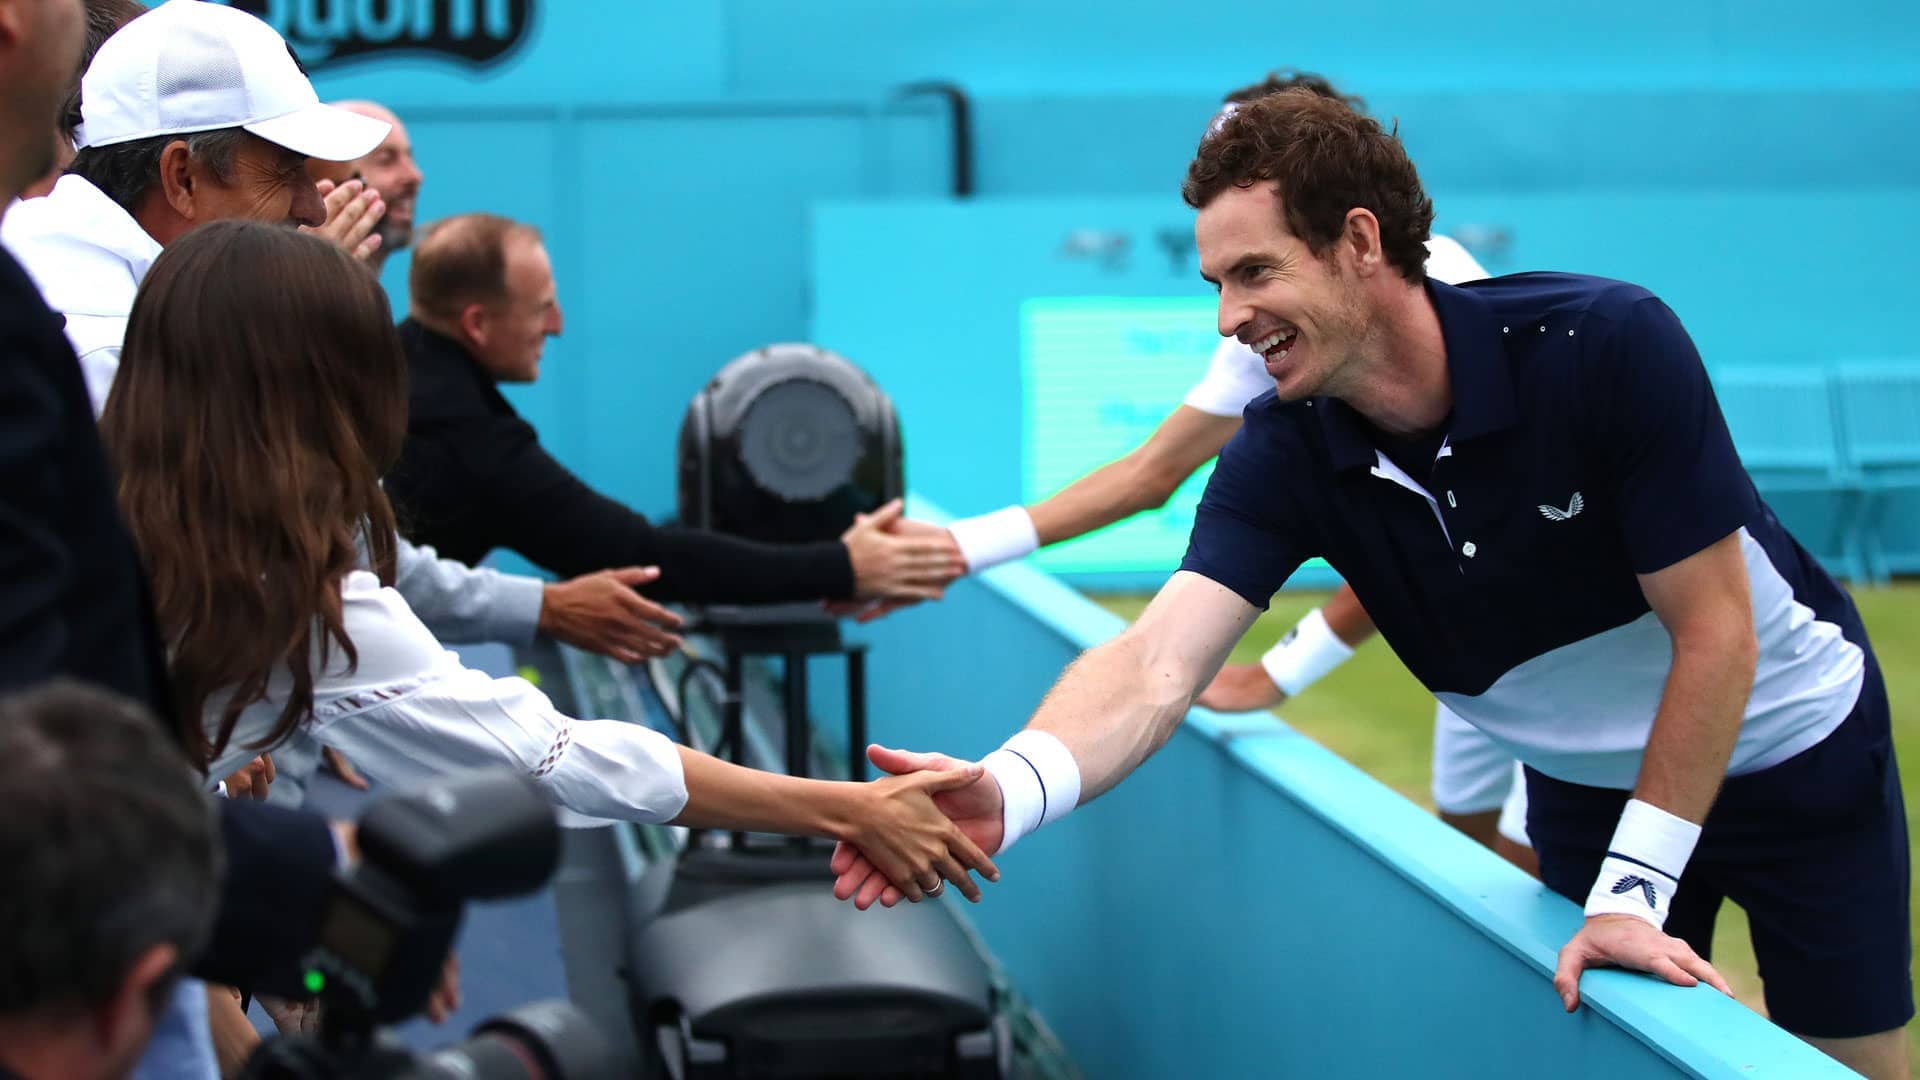 <a href='https://www.atptour.com/en/players/andy-murray/mc10/overview'>Andy Murray</a> celebrates at Queen's Club 2019